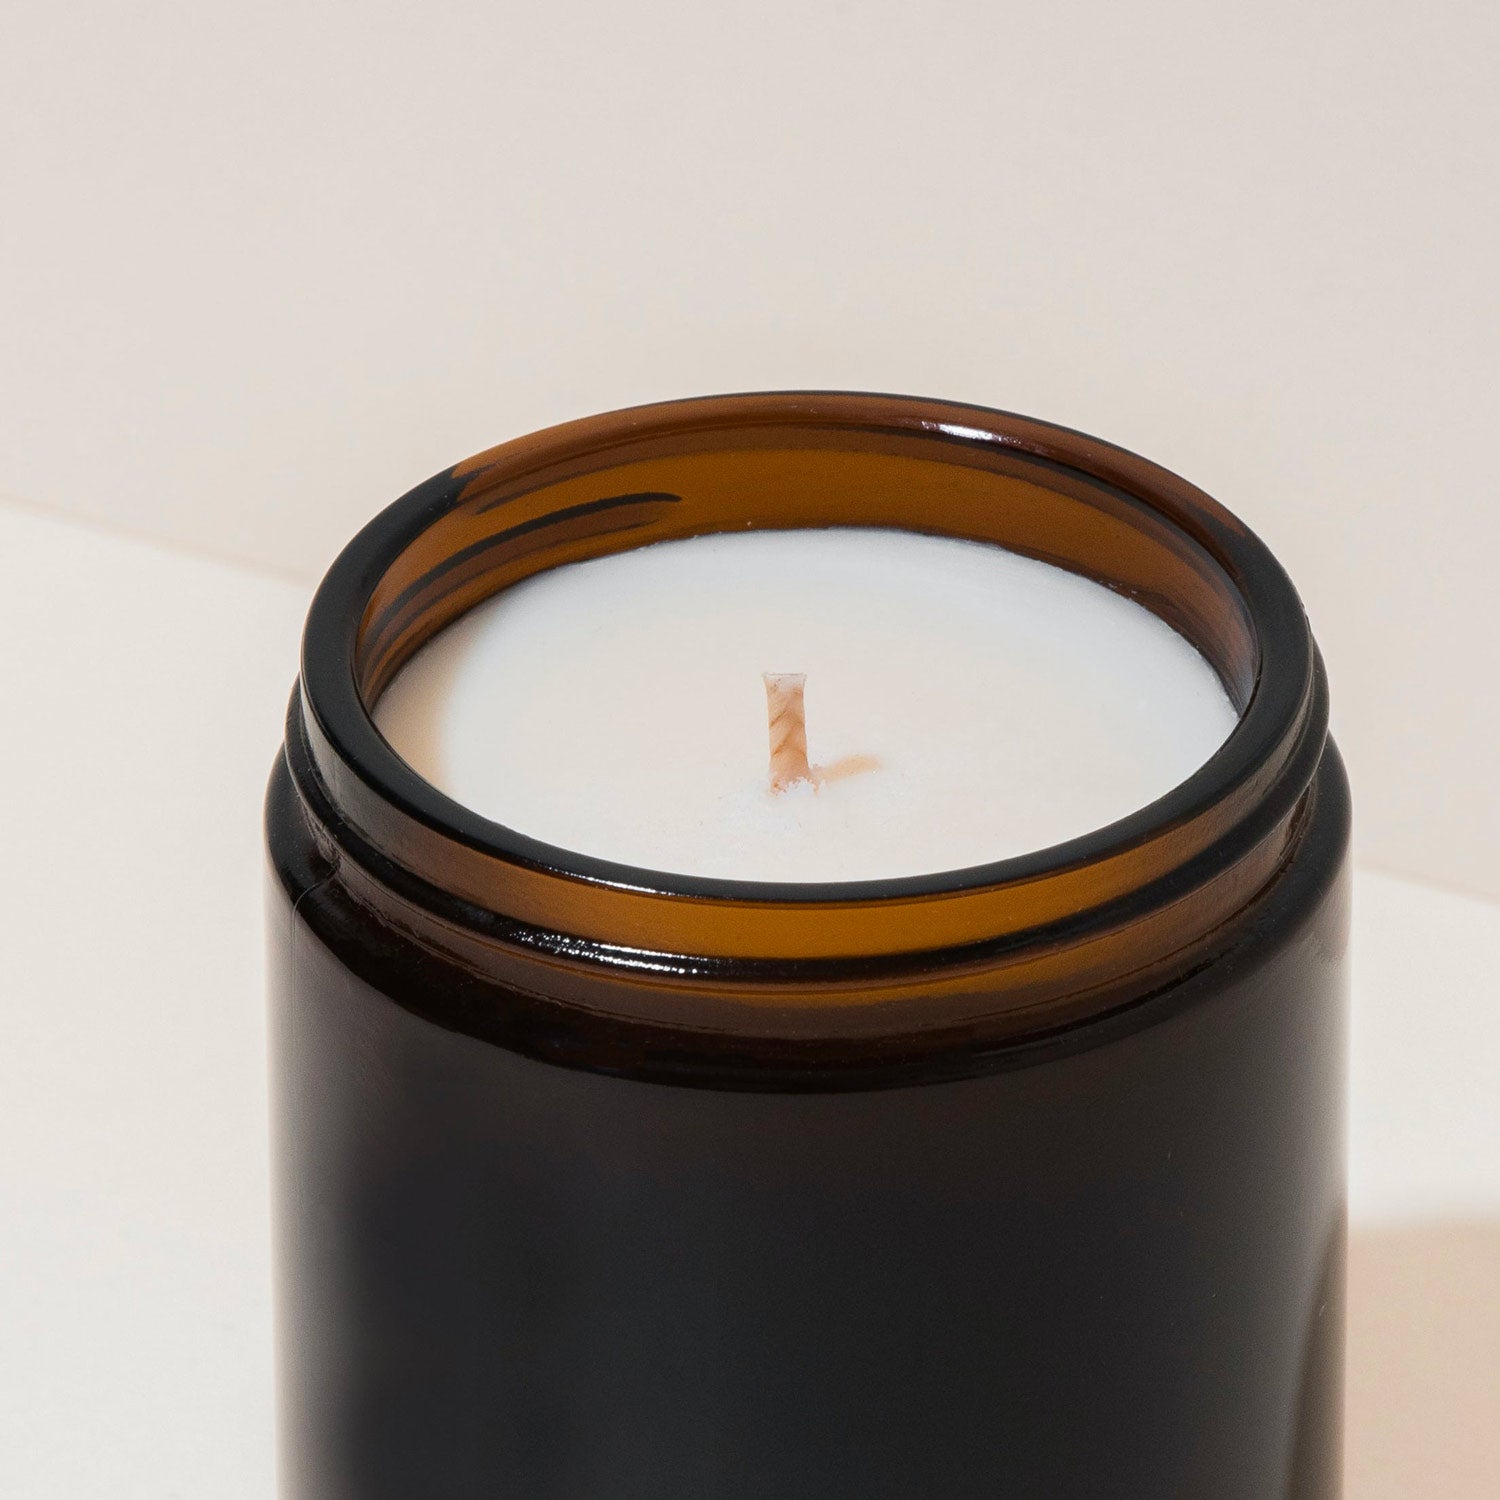 New soy wax candle in amber jar close view